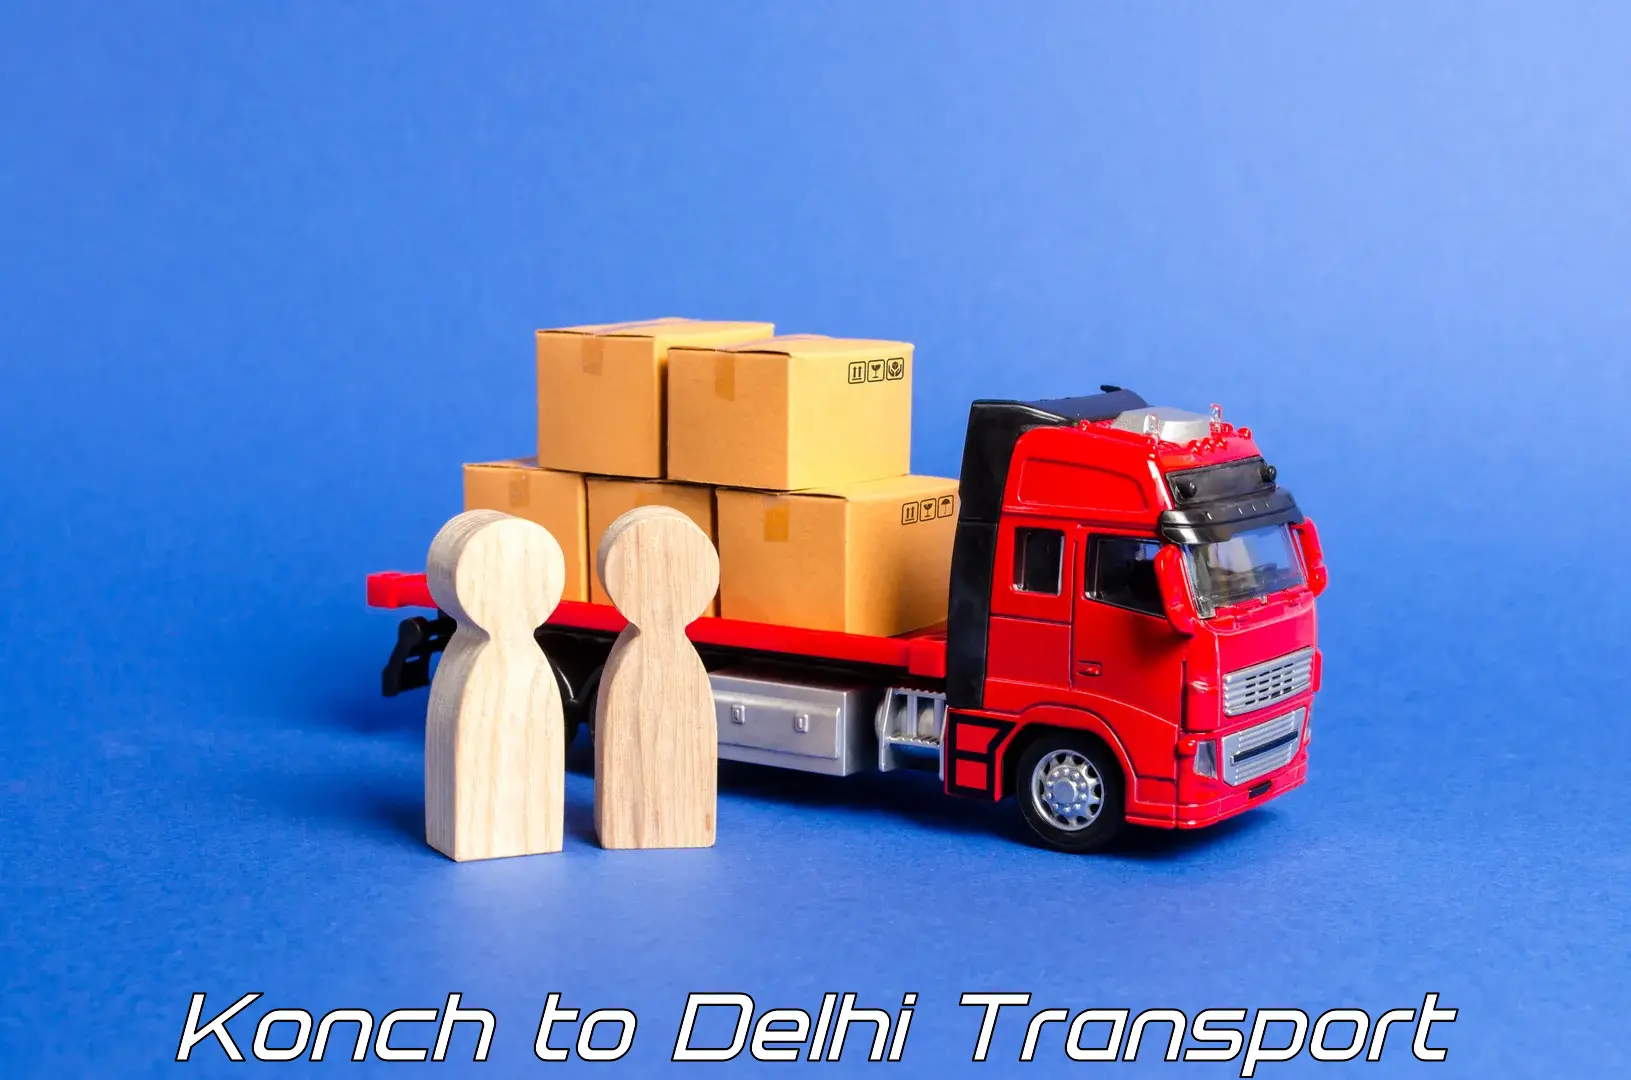 Interstate transport services Konch to Lodhi Road